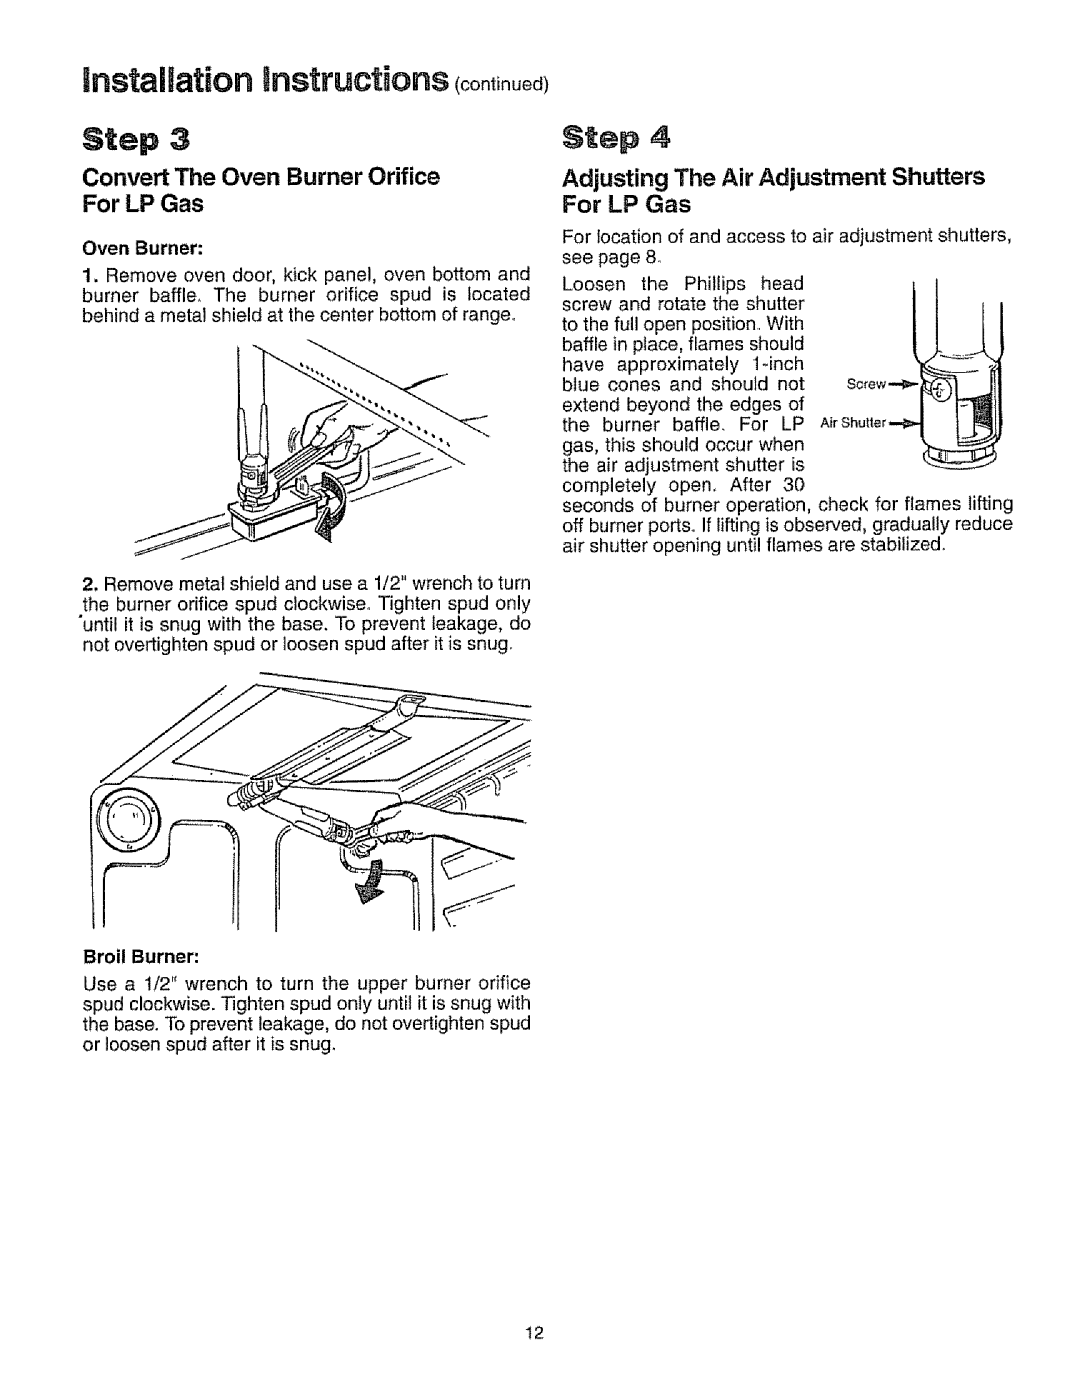 Sears 73321, 73328 Installation Instructions continued, Step, For LP Gas, Convert The Oven Burner Orifice, Broil Burner 